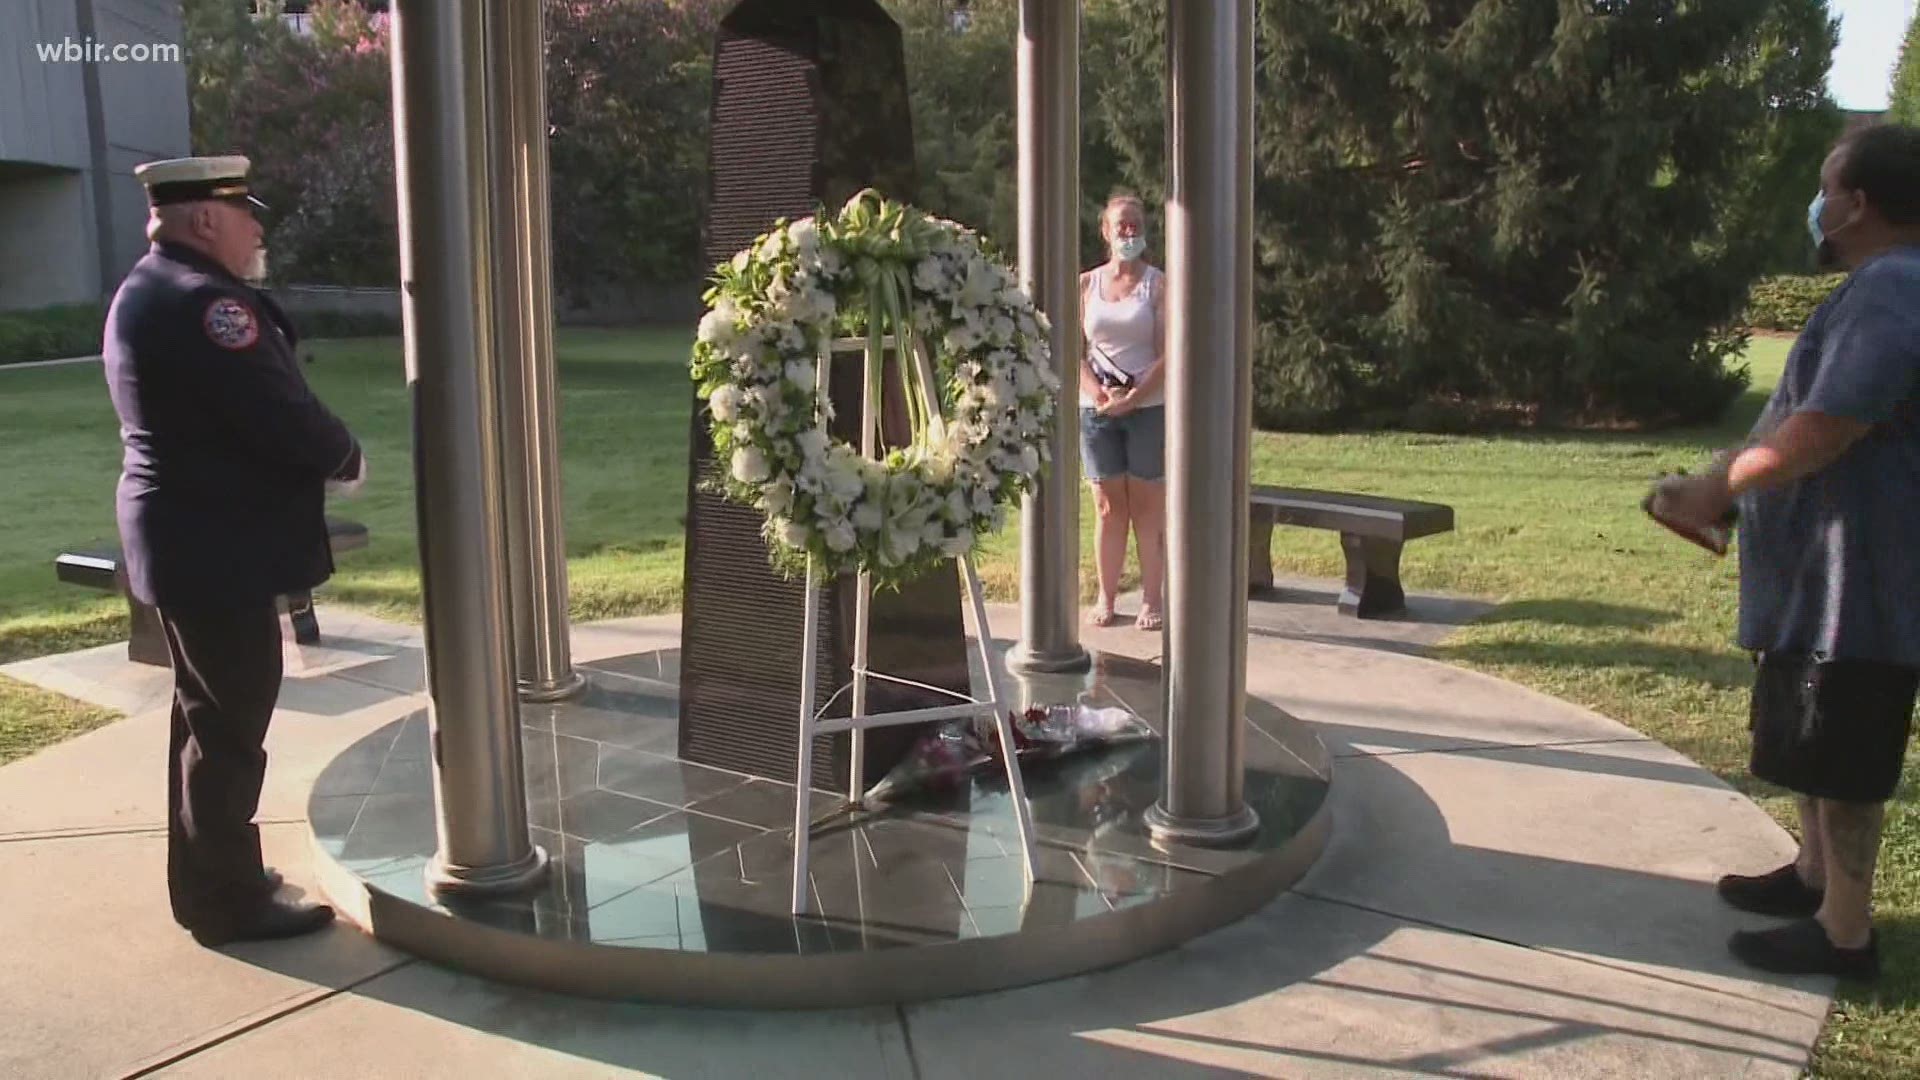 East Tennessee marked Friday the 19th anniversary of the Sept. 11 attacks.